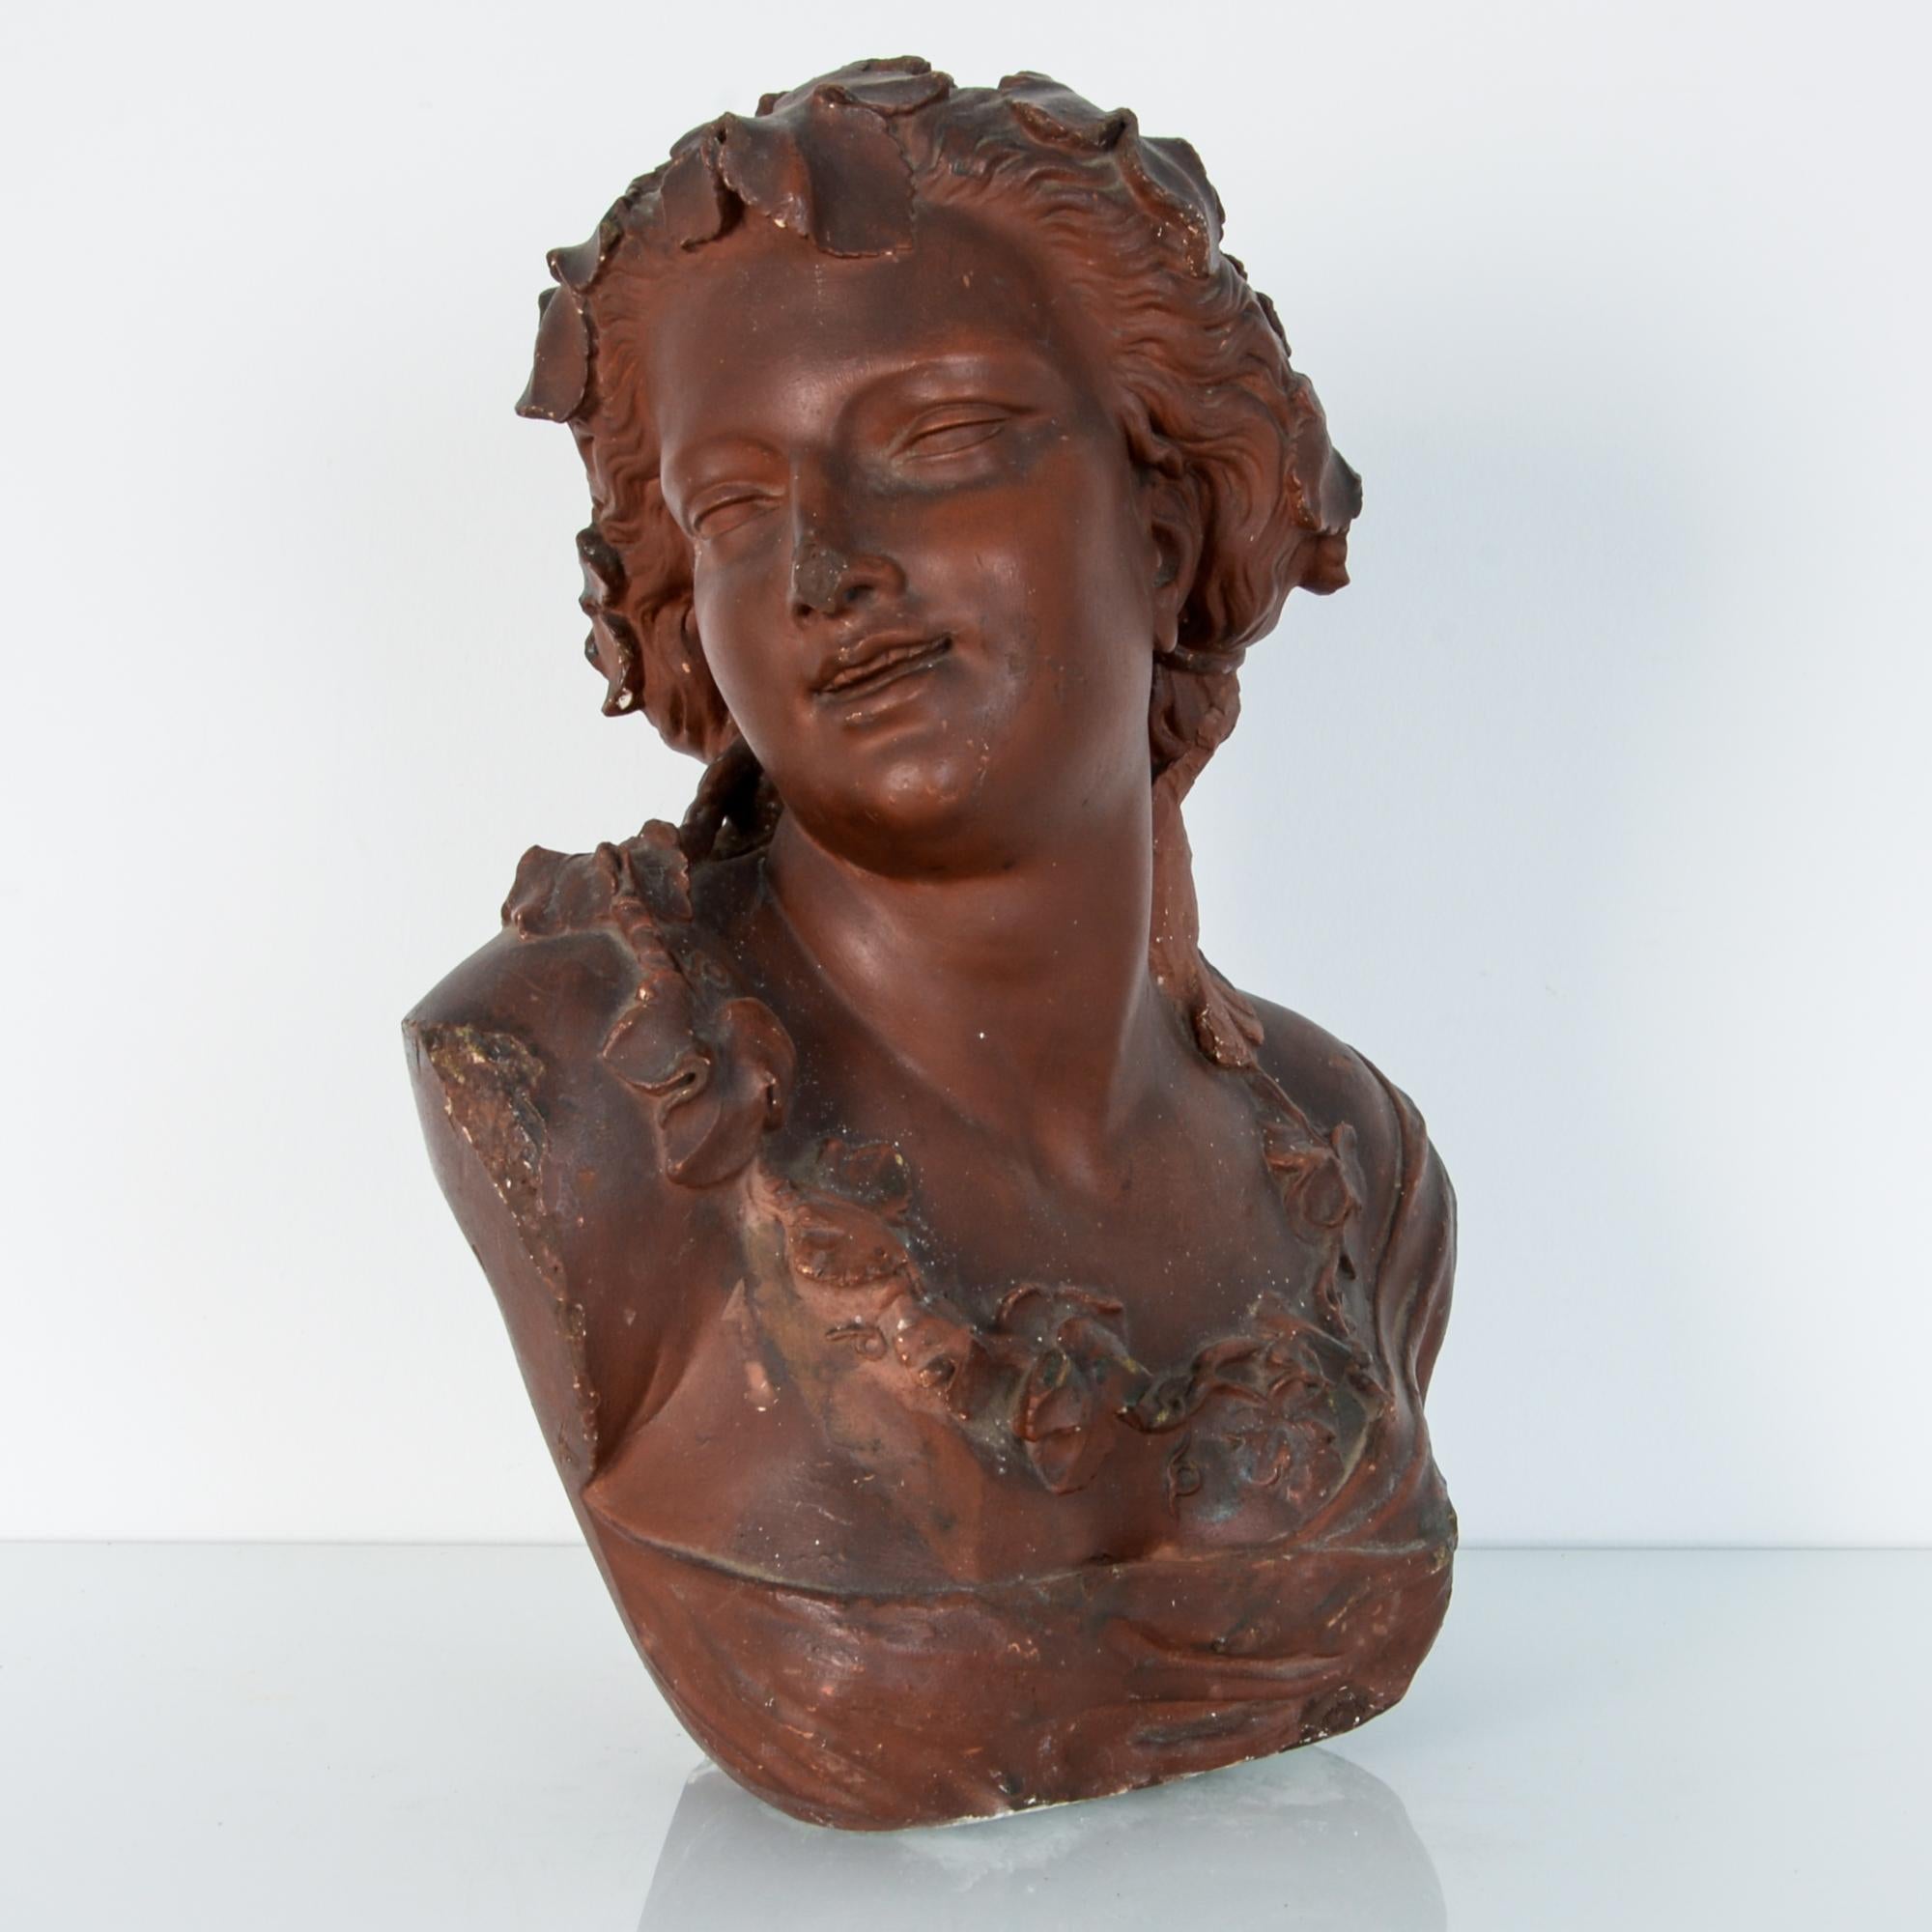 From France, late 19th century, this red painted plaster bust was originally placed in an architectural niche. Depicting a female figure in a pose of delight or curiosity, as intended, serves to enhance and lighten the interior decoration. With a